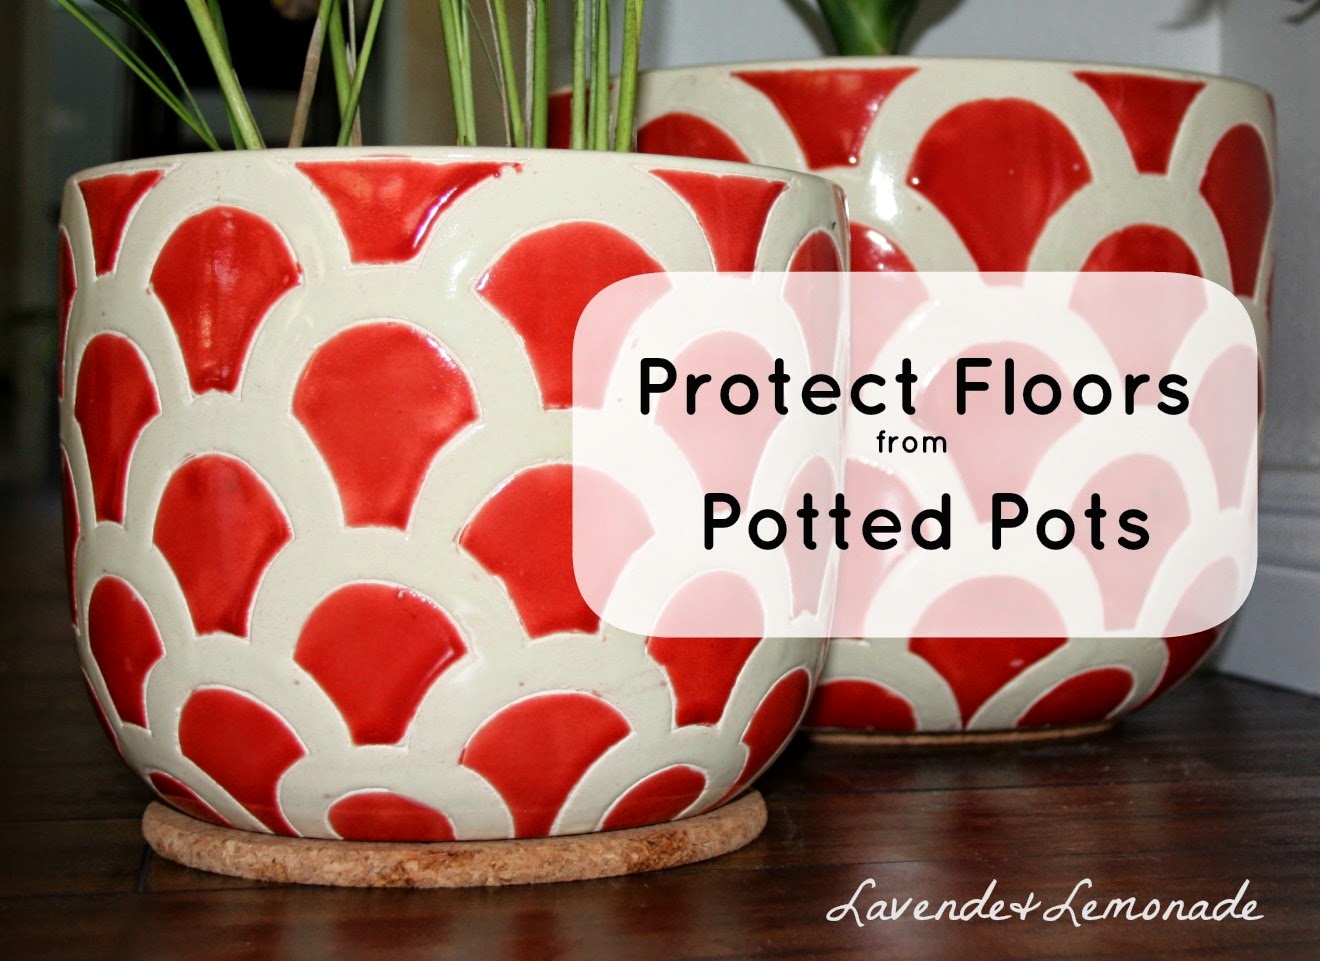 Use cork pads to protect floors from potted plants!